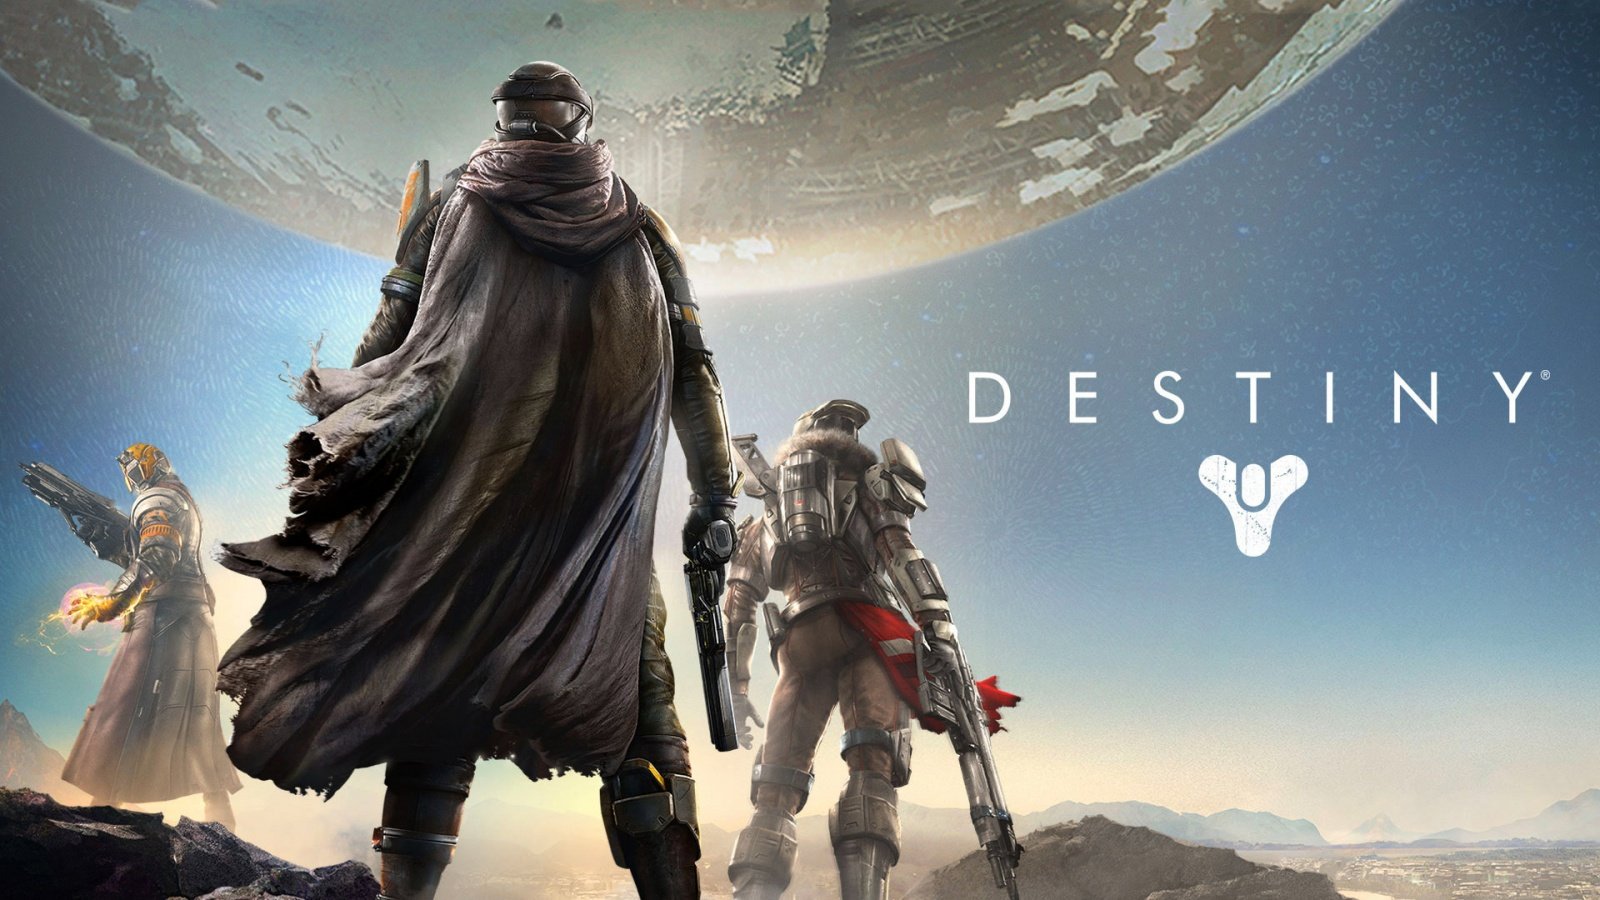 Destiny 2014 Game Wallpapers HD Wallpapers